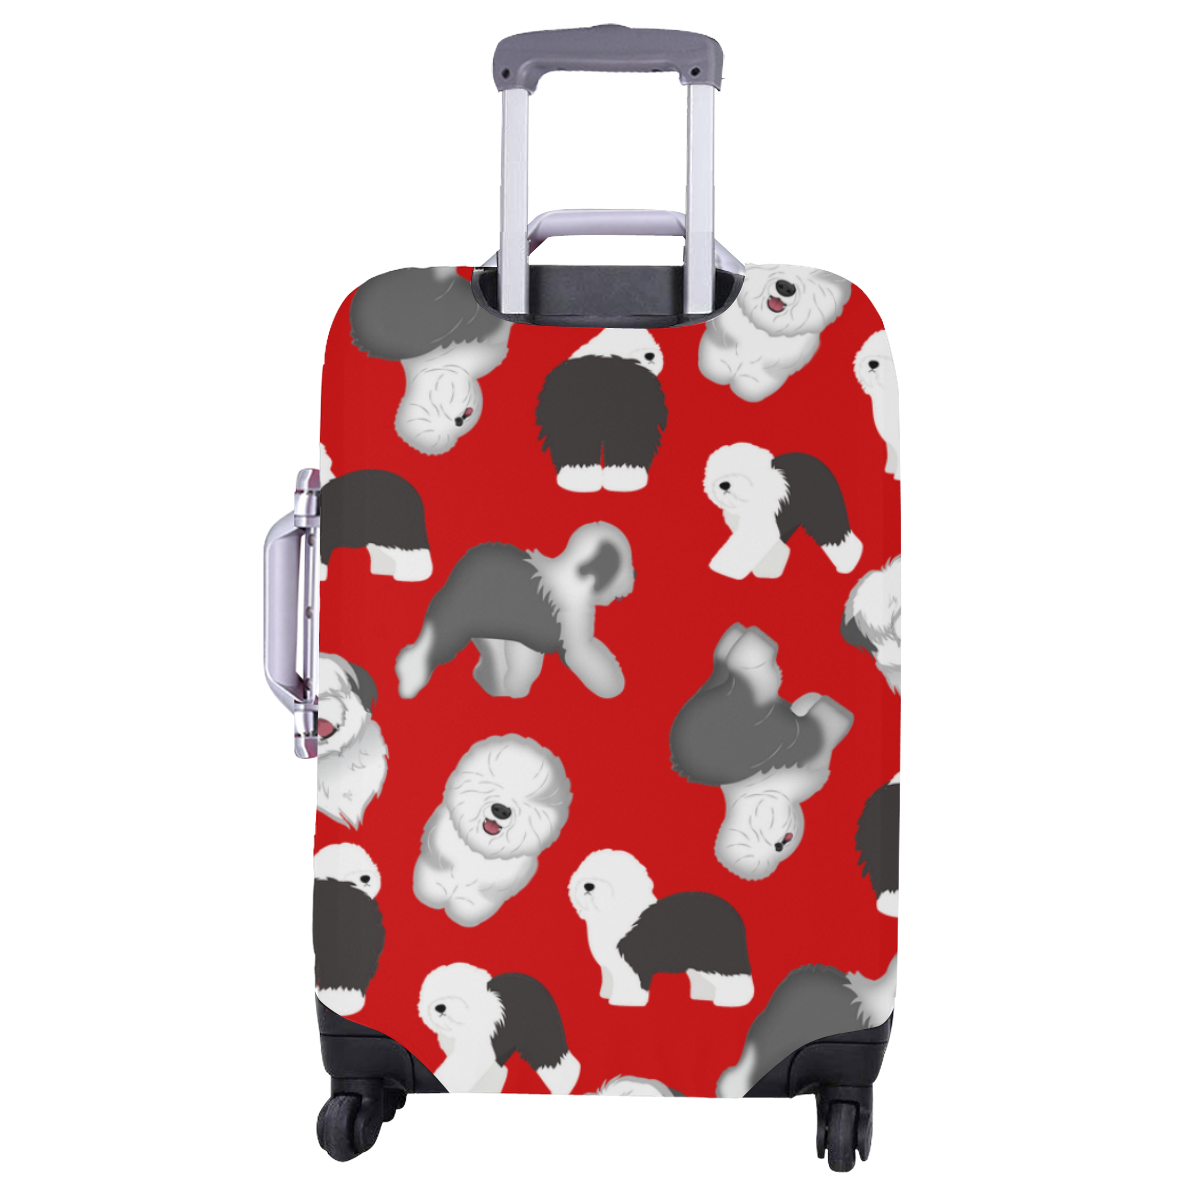 Multi Sheepies Luggage Cover/Large 26"-28"